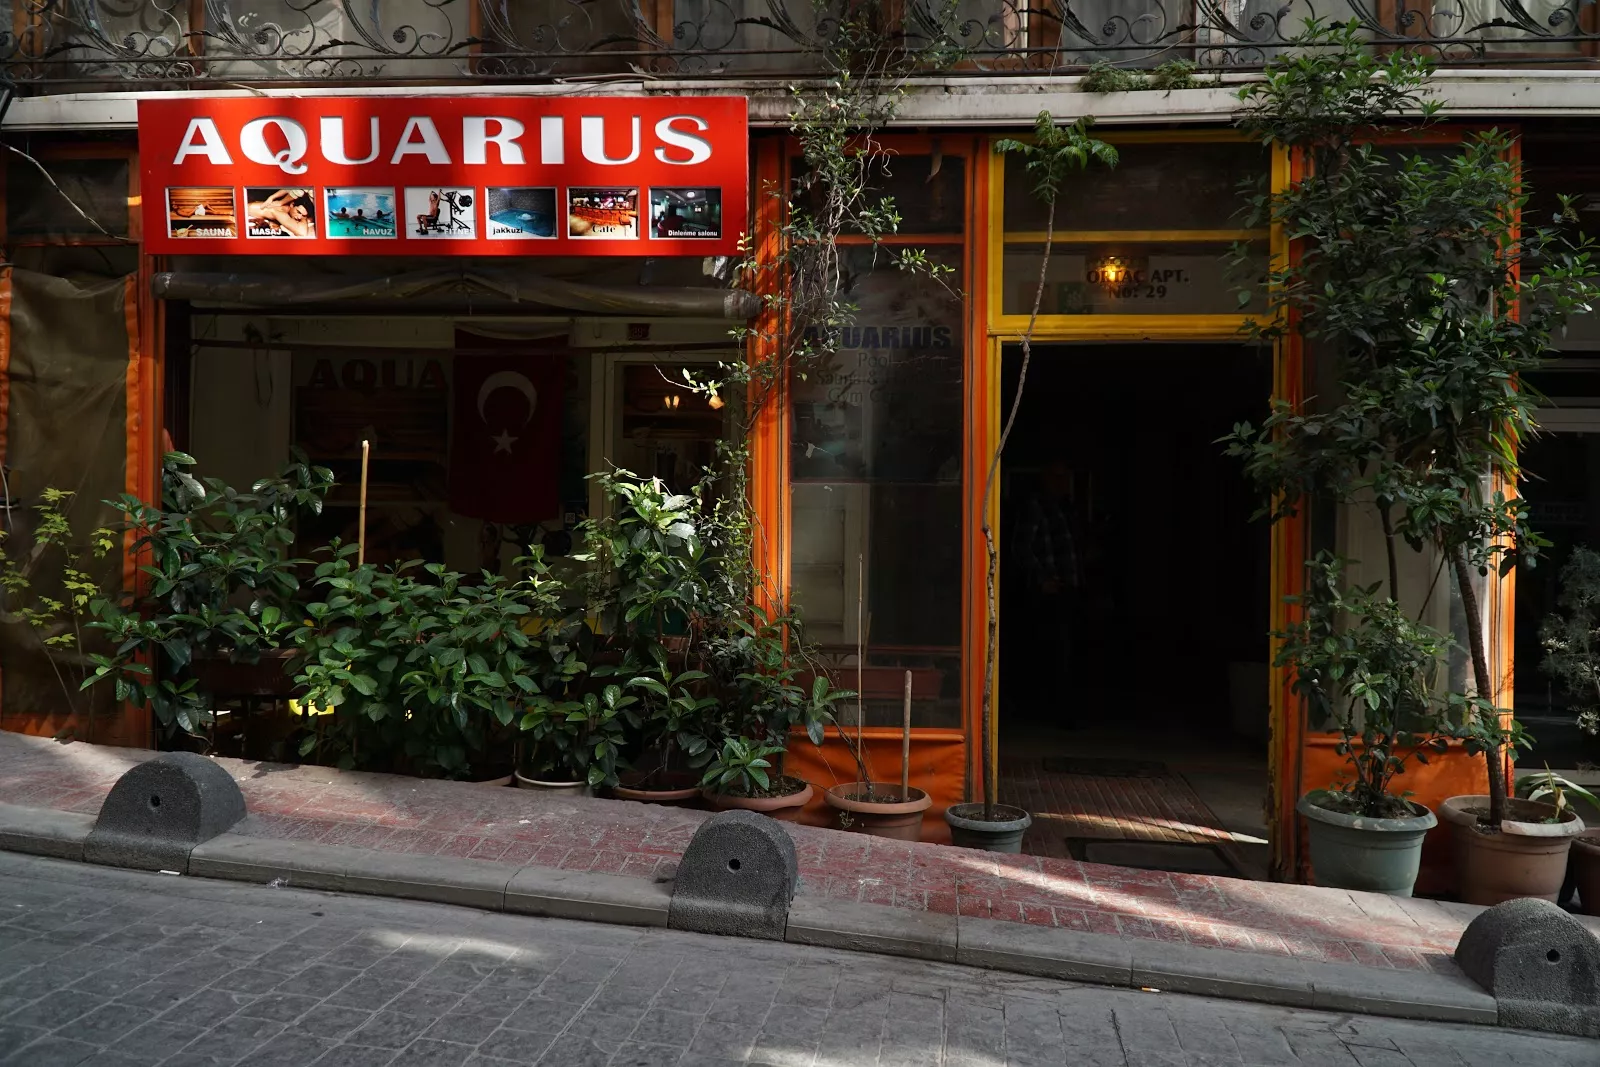 Aquarius Sauna in Turkey, Central Asia | LGBT-Friendly Places,Sex-Friendly Places - Rated 2.8